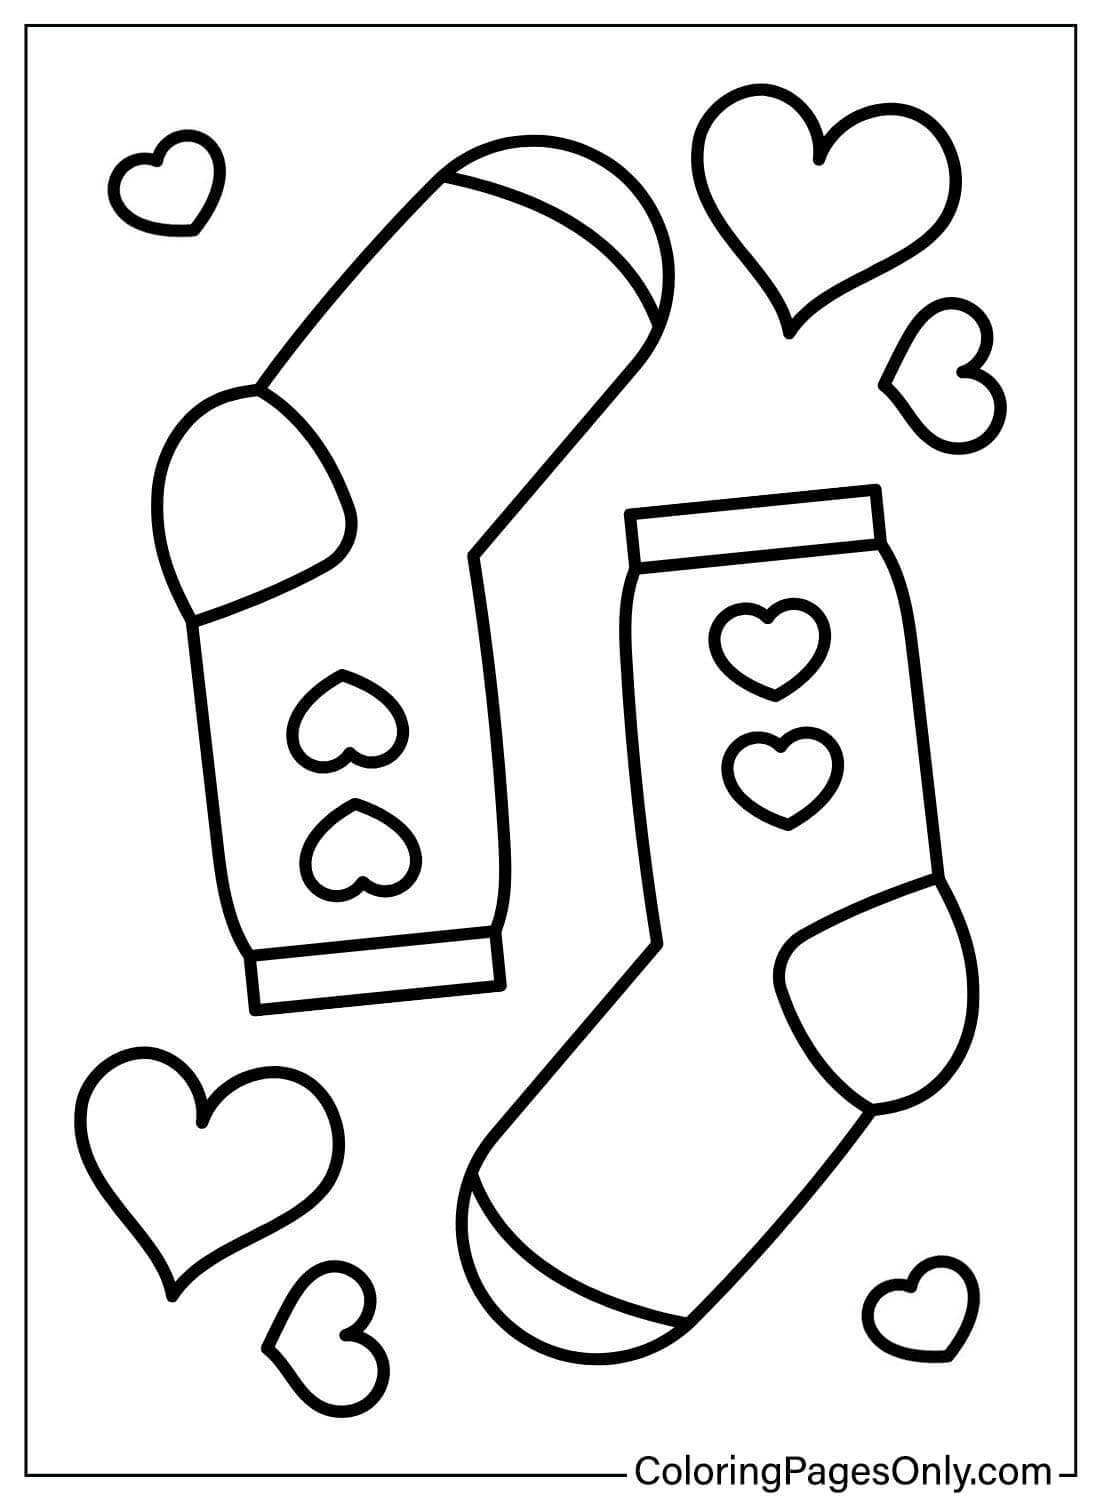 Socks with Heart Coloring For Kids from Socks